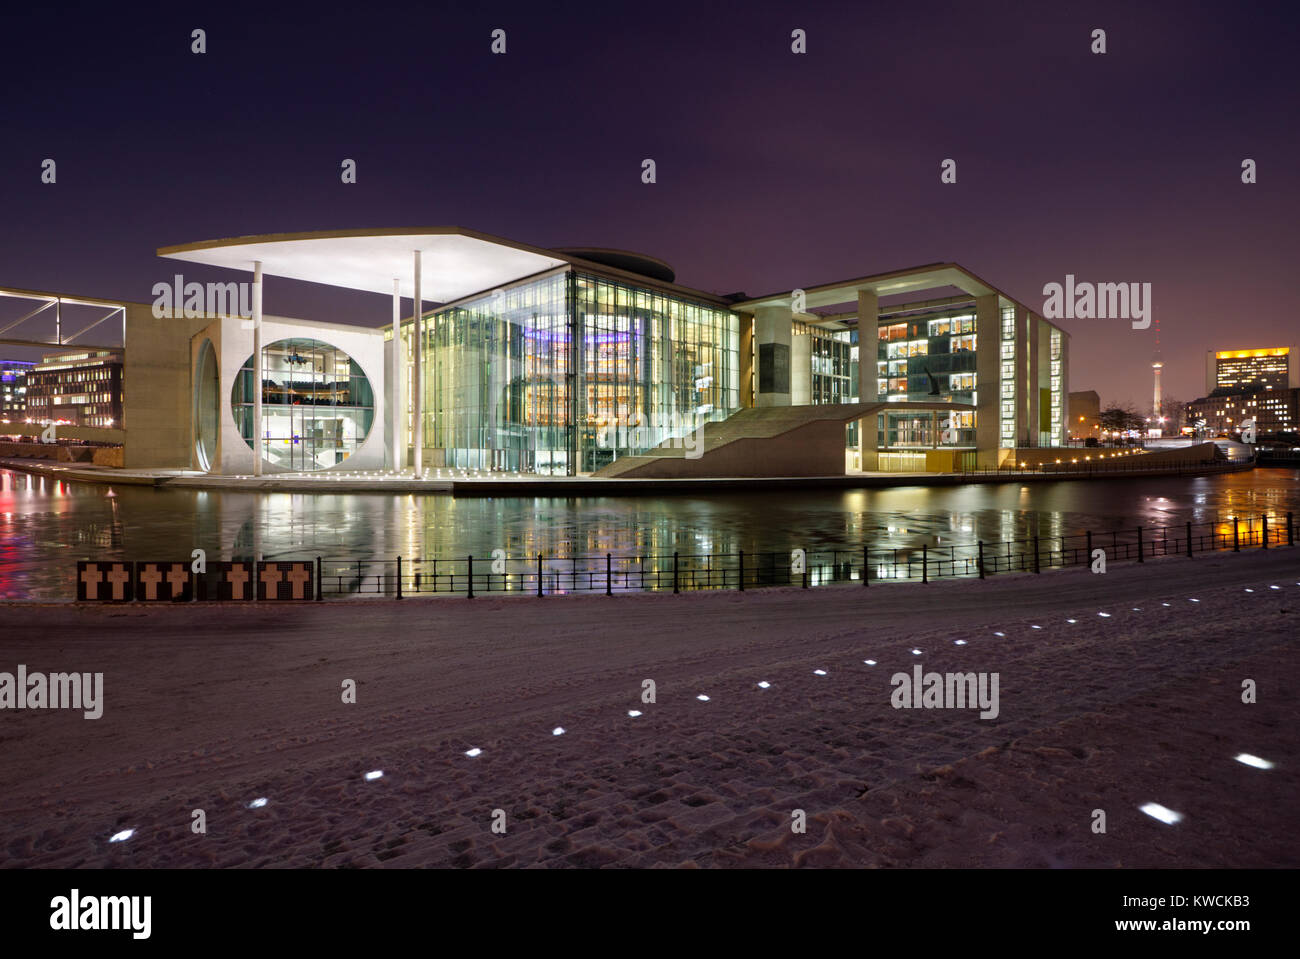 The Marie-Elisabeth-Lueders-Haus which is part of the government district in Berlin, Germany at night. Stock Photo